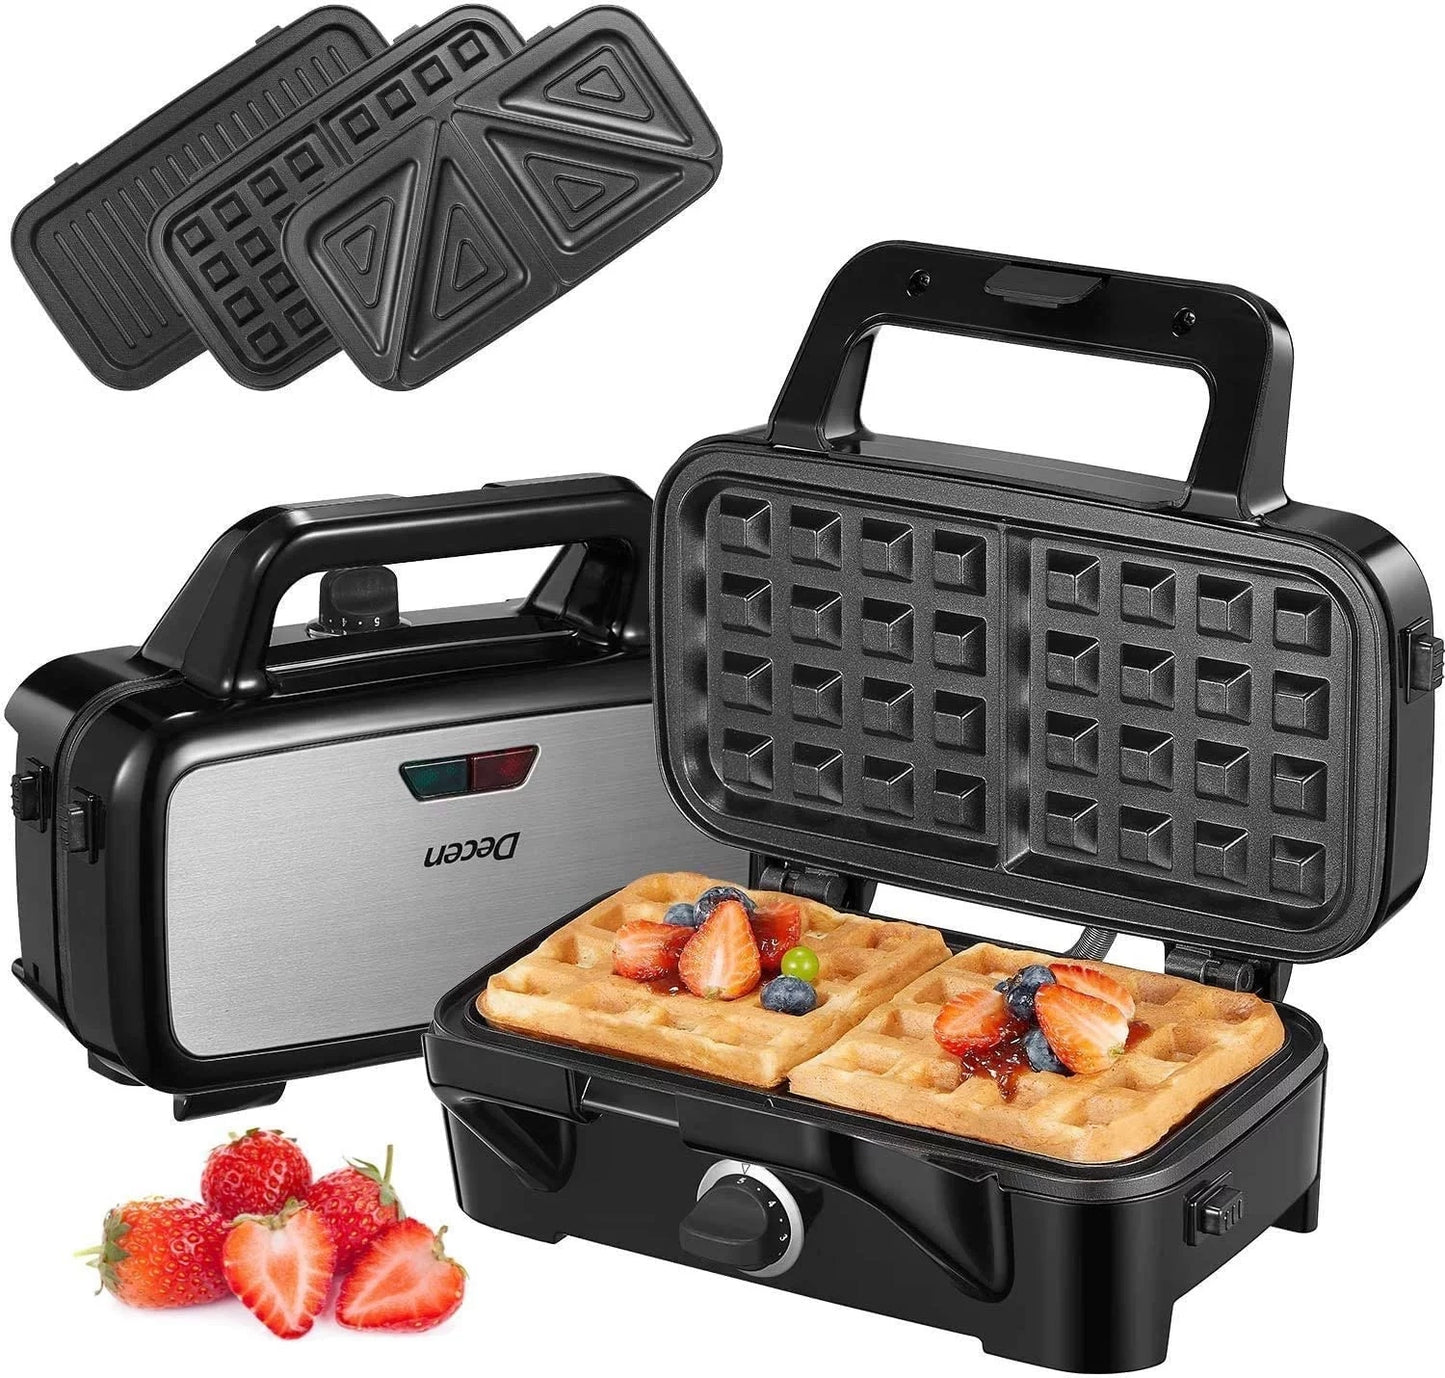 Decen 3-in-1 Sandwich Maker with Removable Plates, 1200W, Black